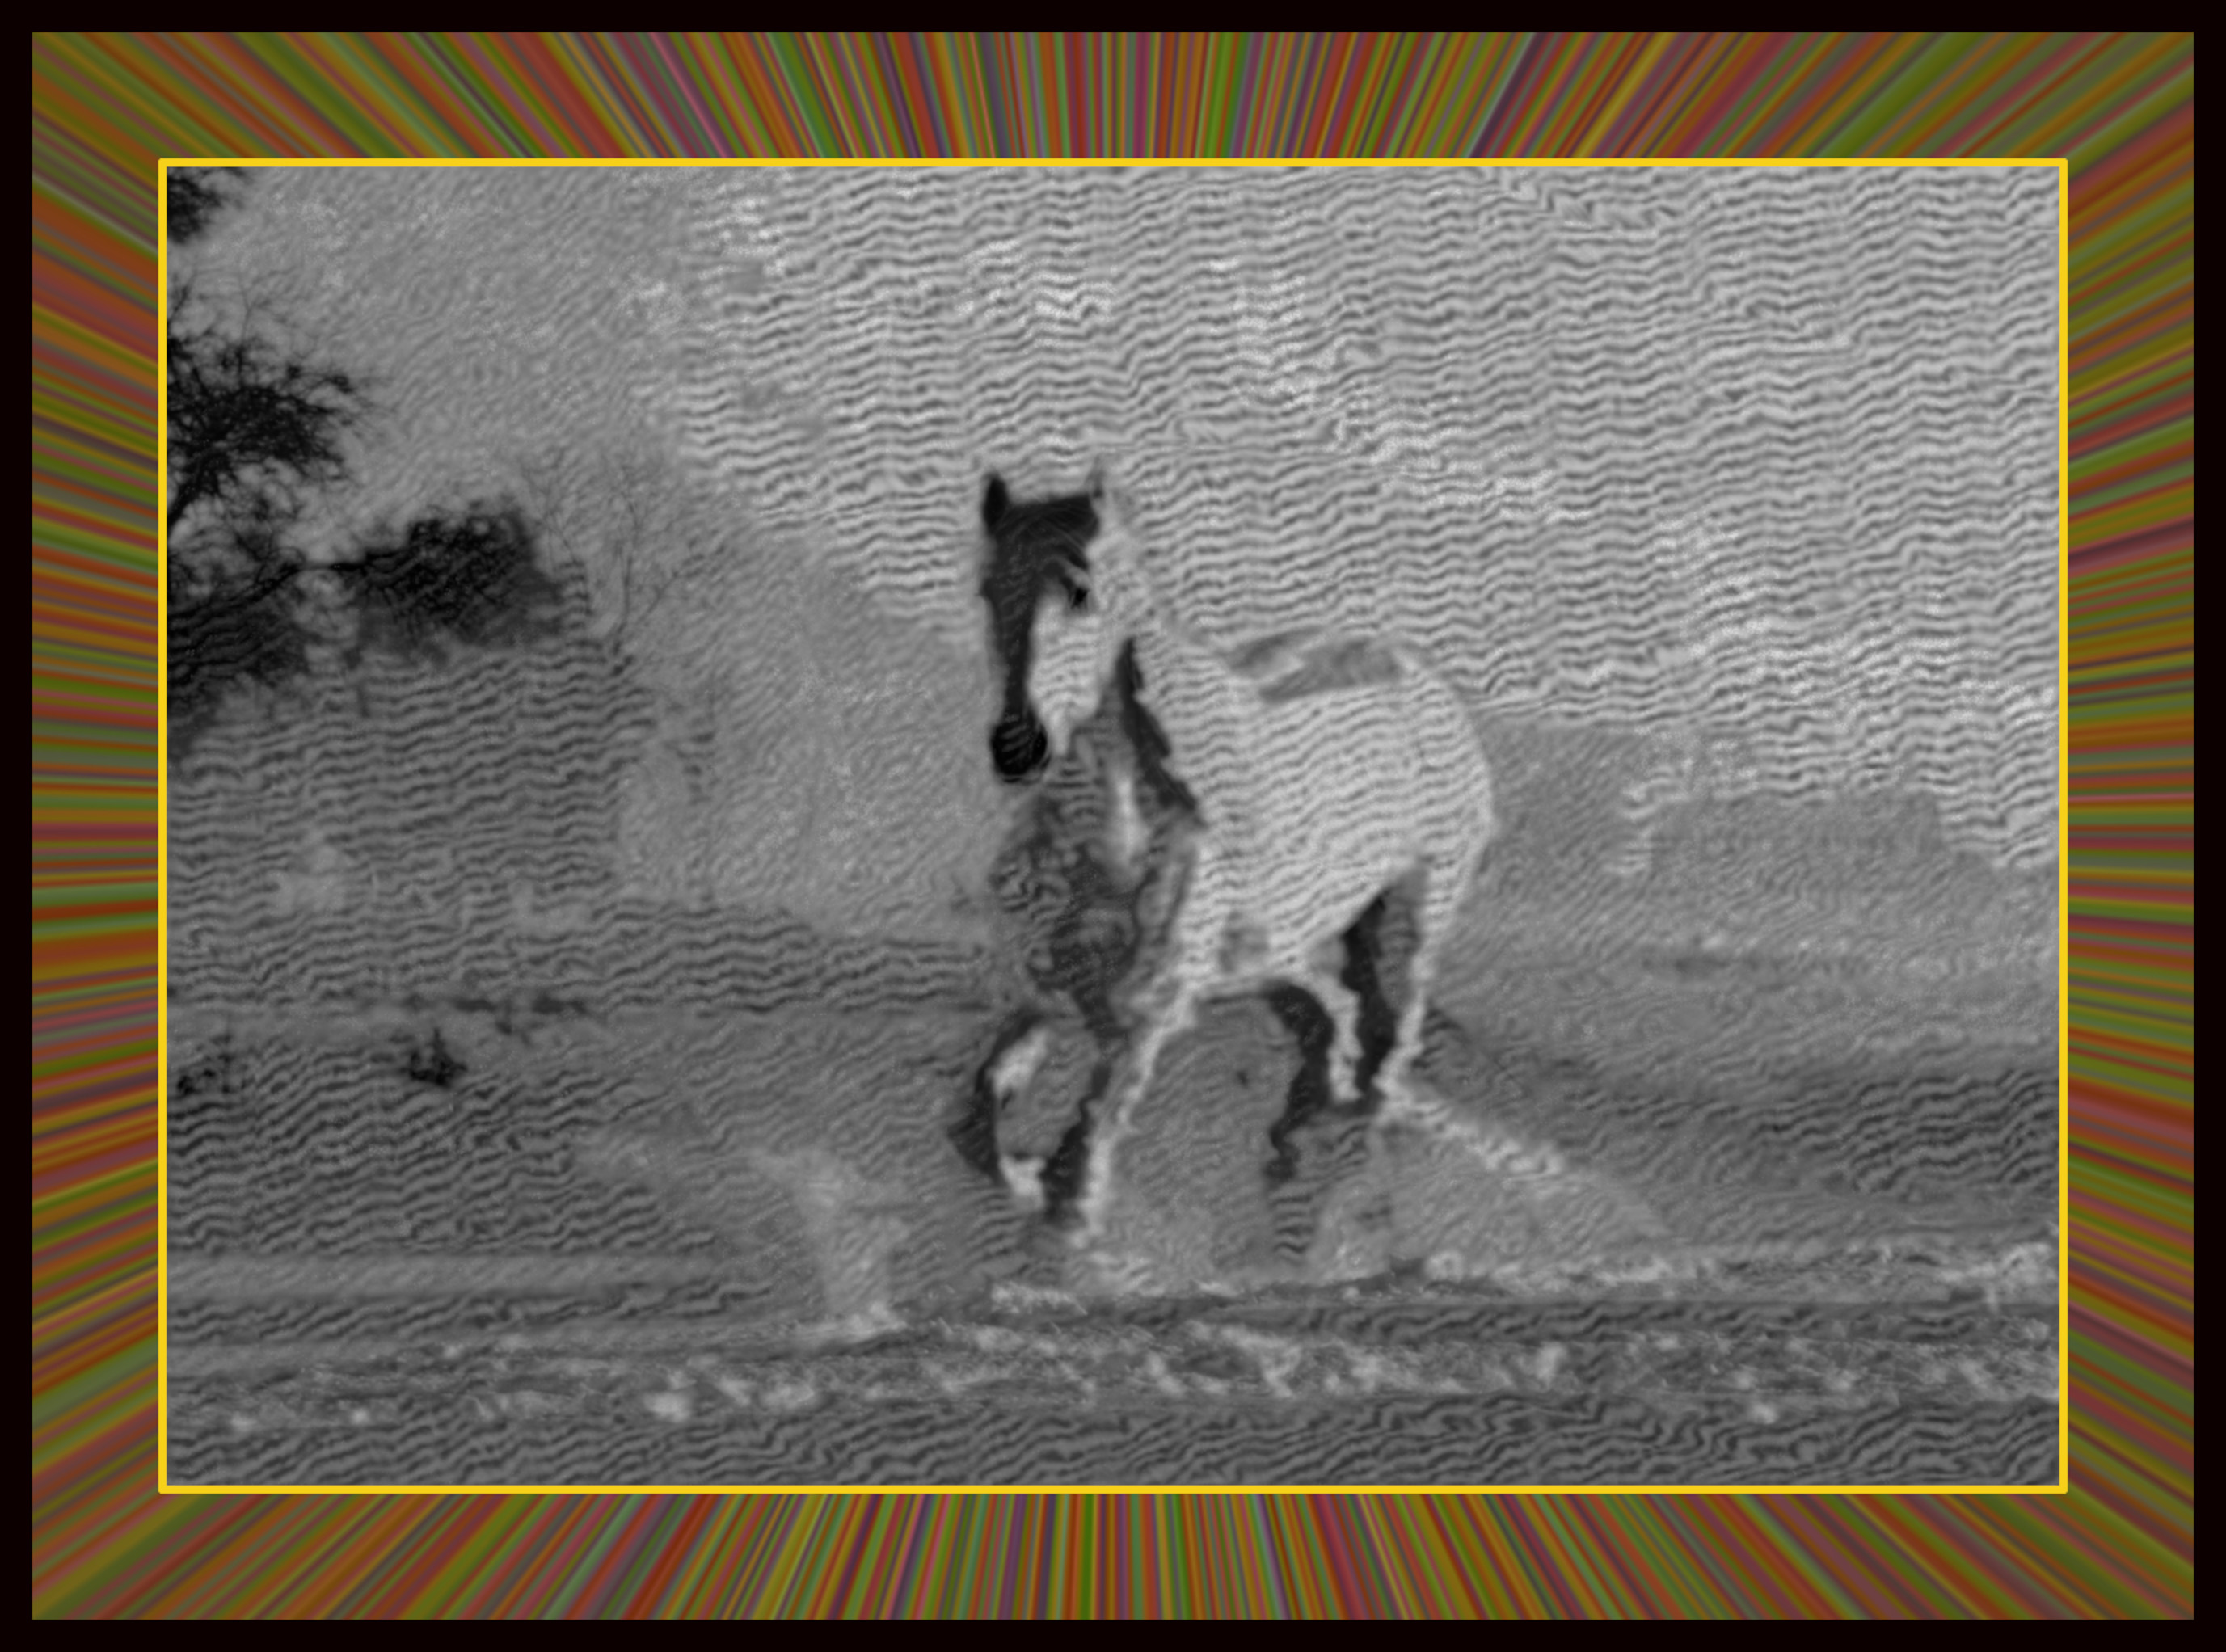 2020-12-15 13-01-55 white-horse-3010129_960_720, stroked  using 9 colours giving 25.0% influence to the edges, B&W (framed 10%).jpeg